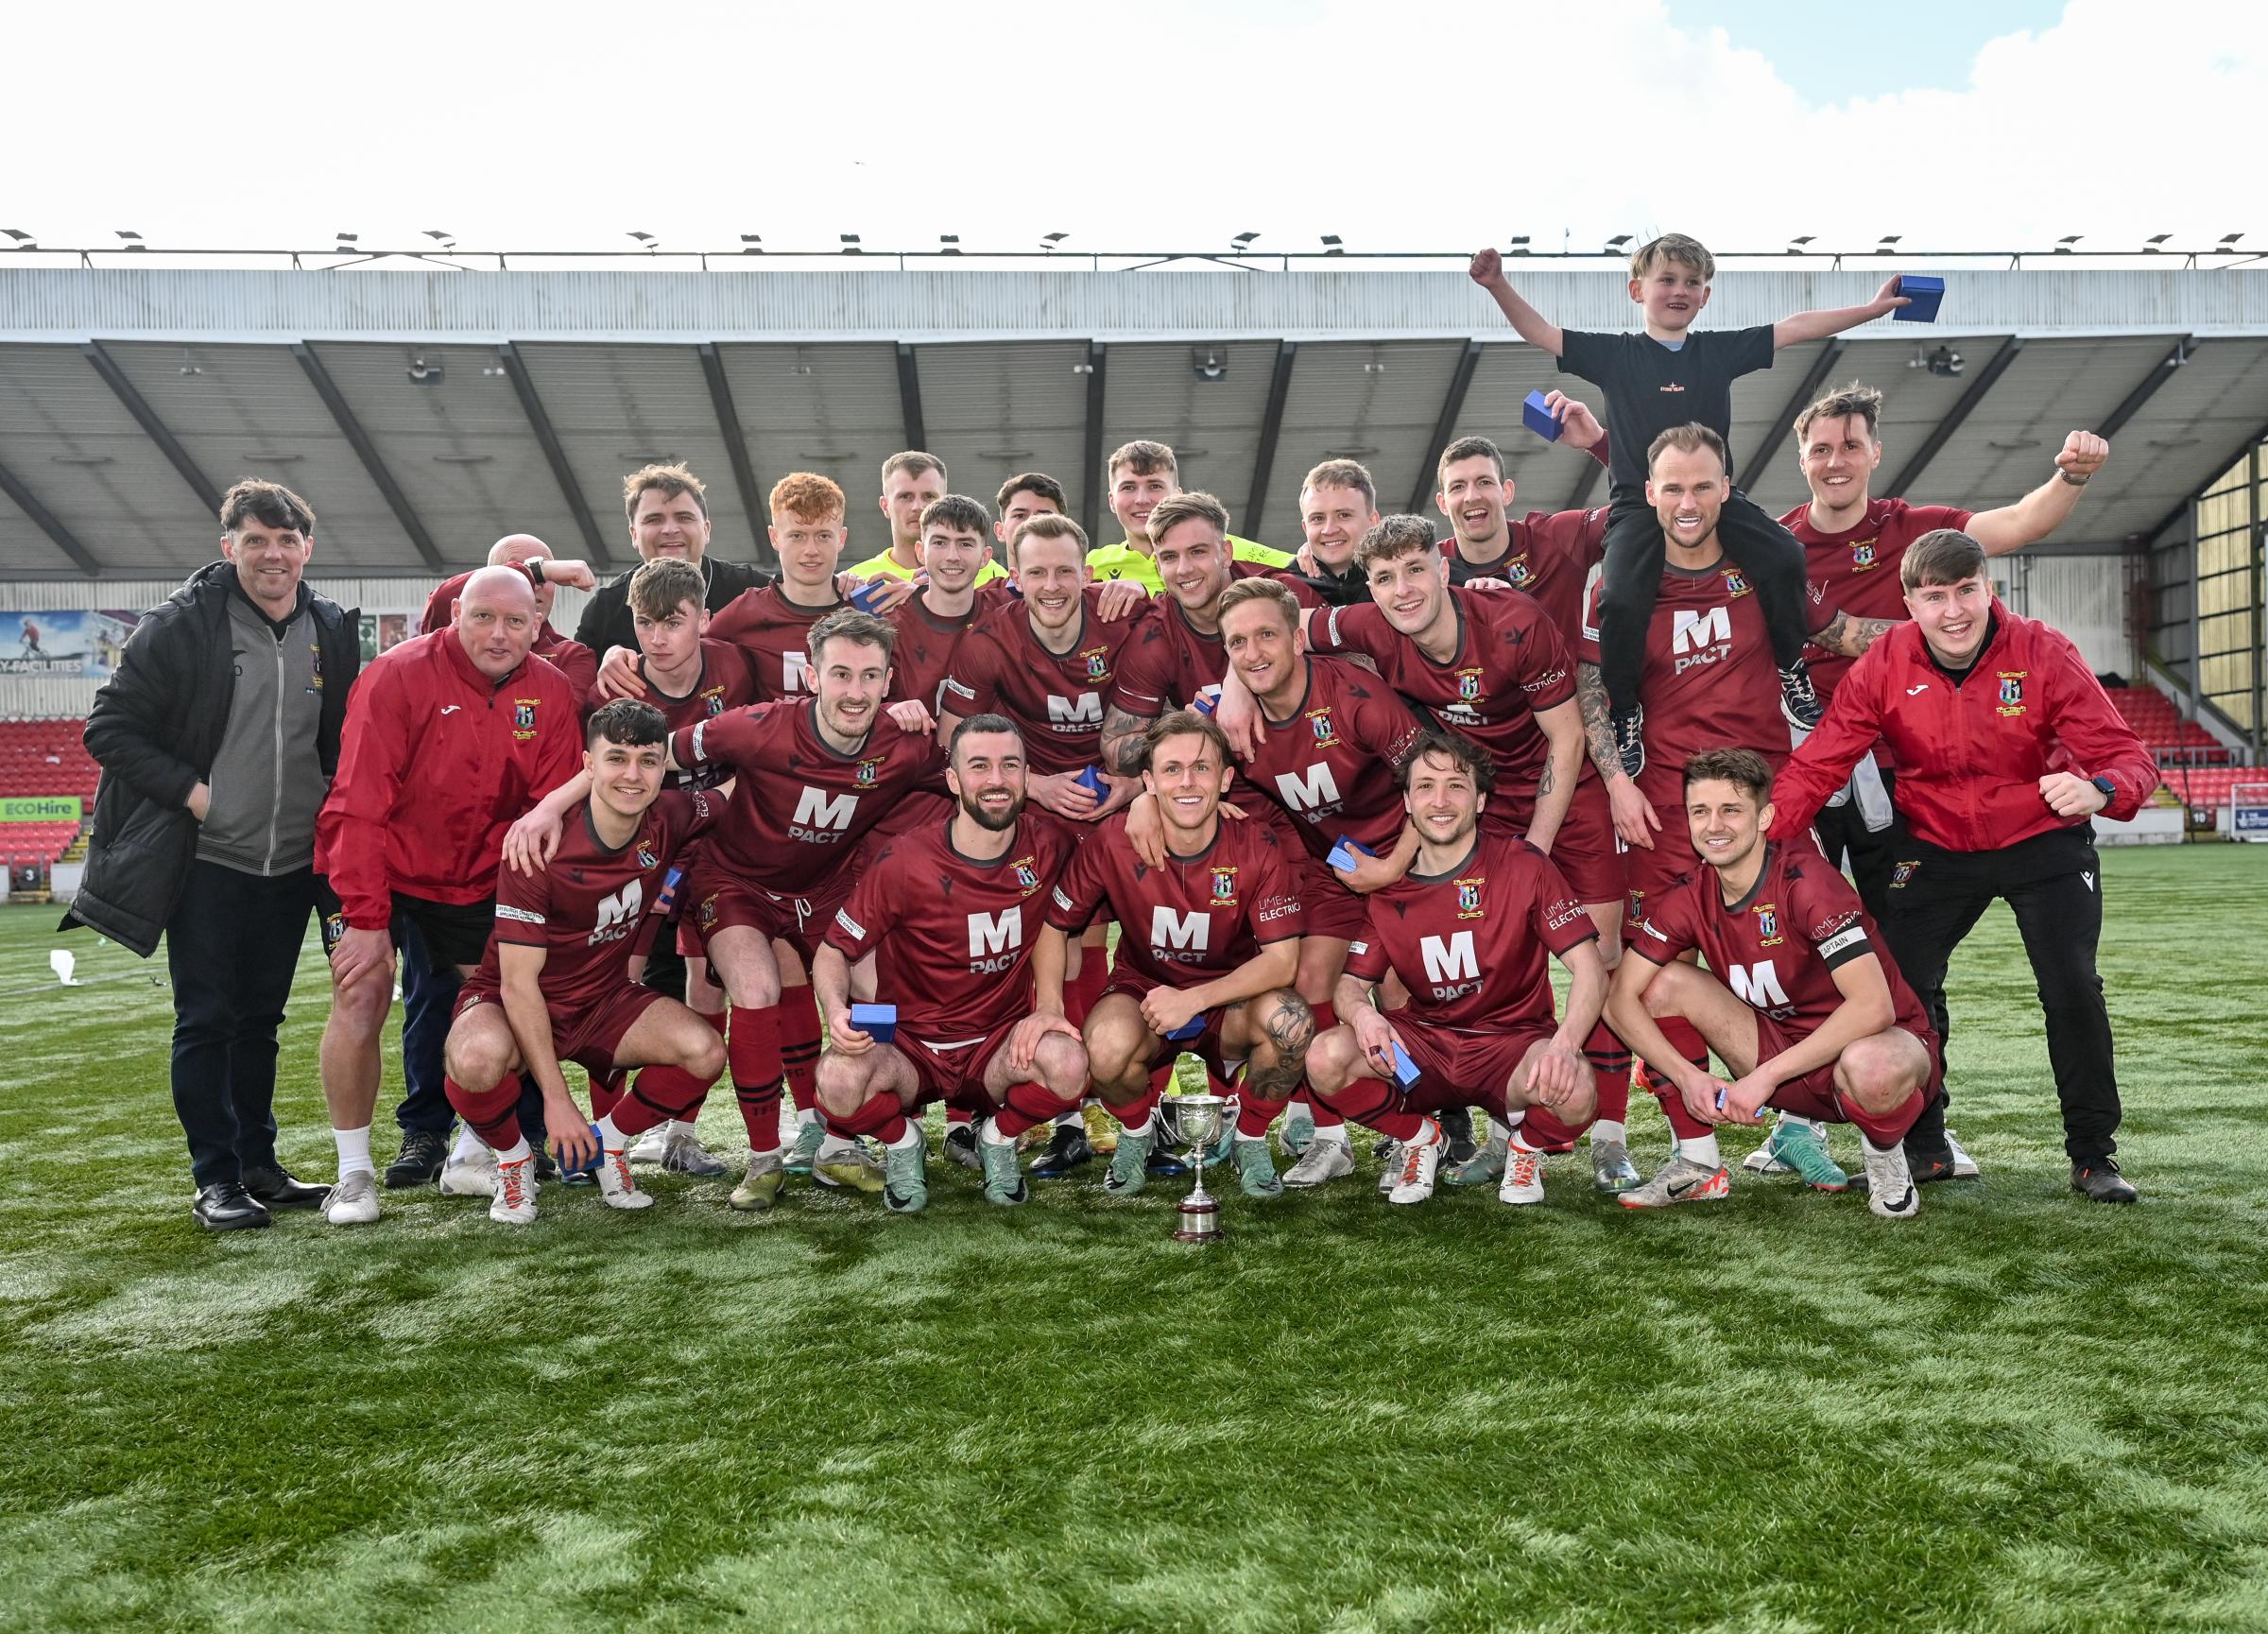 Tranent have secured their first cup as a senior side after defeating East Kilbride in the Lowland League Cup final. Image: Alan Wilson